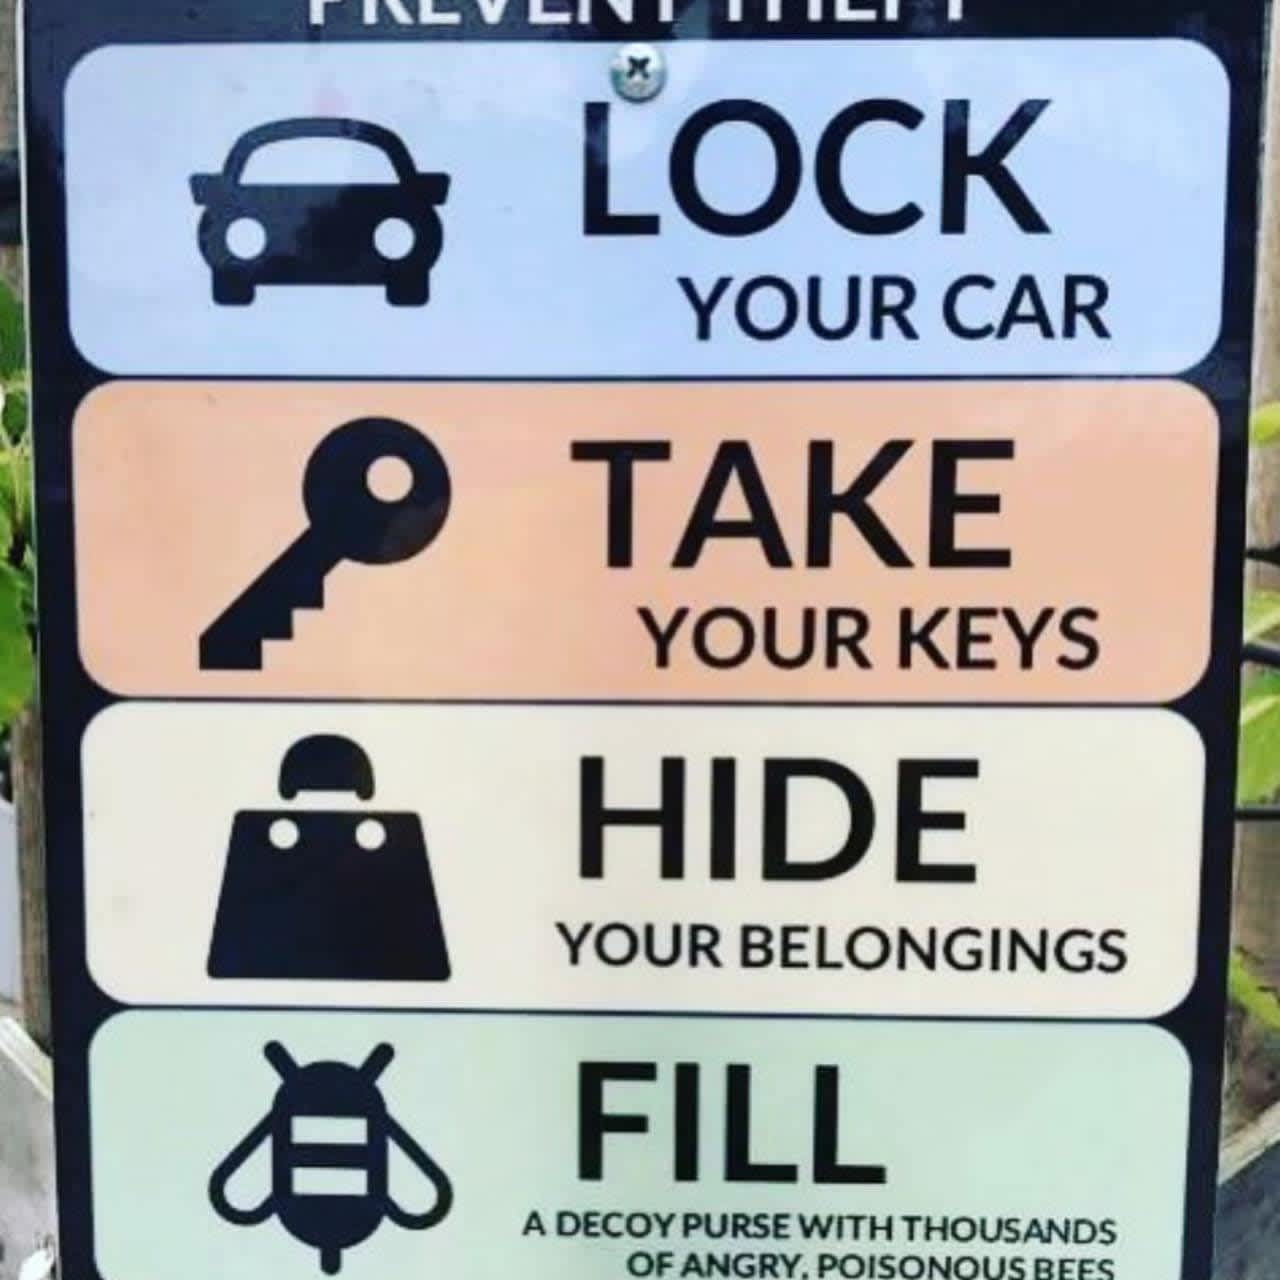 The New Canaan Police Department has provided residents with common sense advice to avoid getting their car stolen.